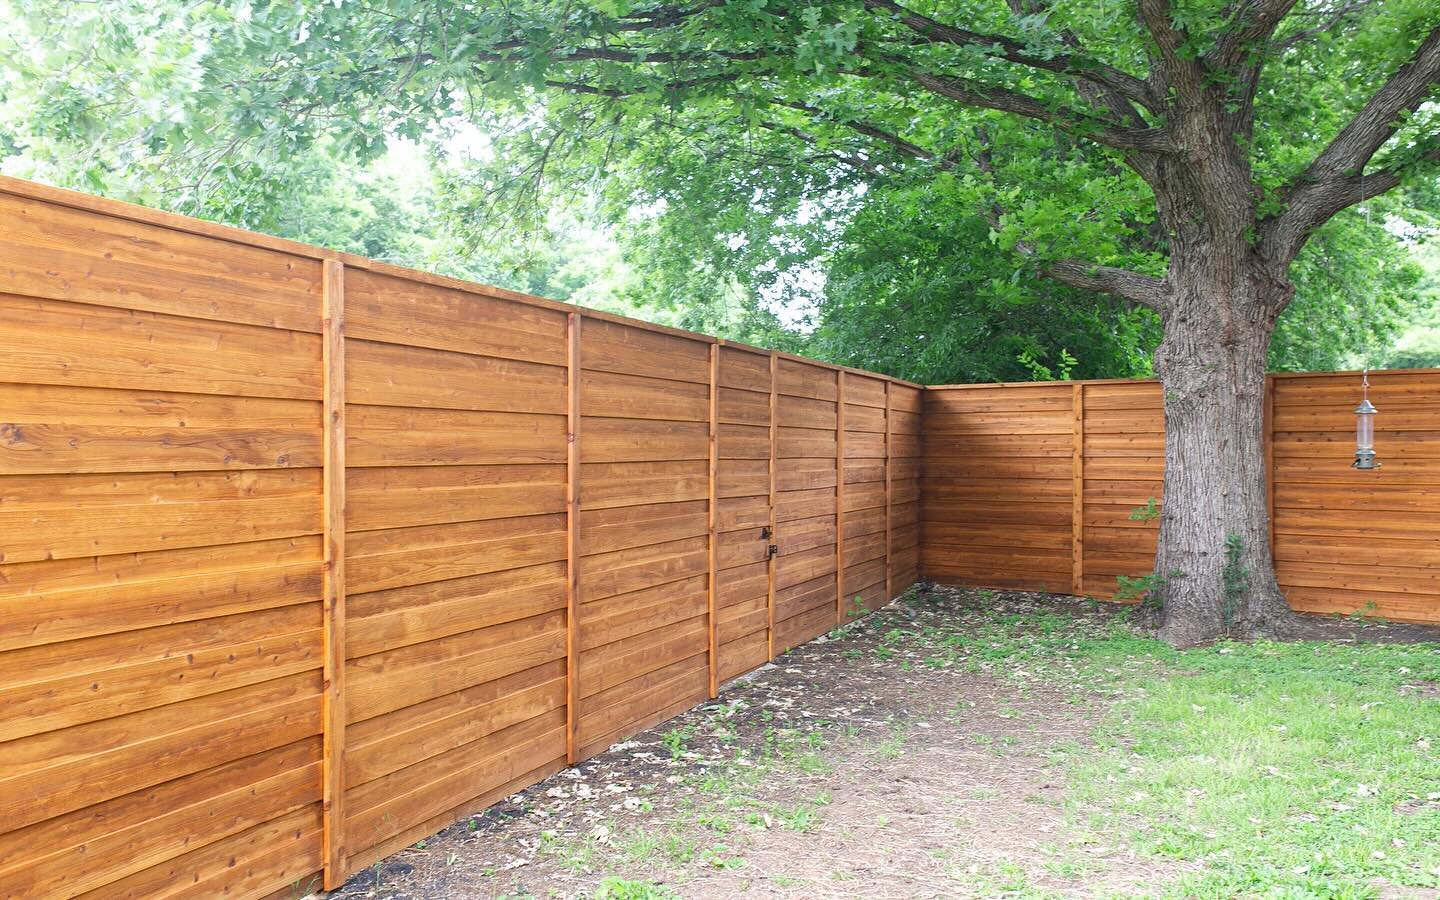 Just in time for spring&hellip;. I gave our backyard a maaajor upgrade! Swipe to see the before!! I can&rsquo;t wait to stare at this new board on board fence view while soaking the Stock Tank Pool this summer 😍

Full build tutorial over on my YouTu